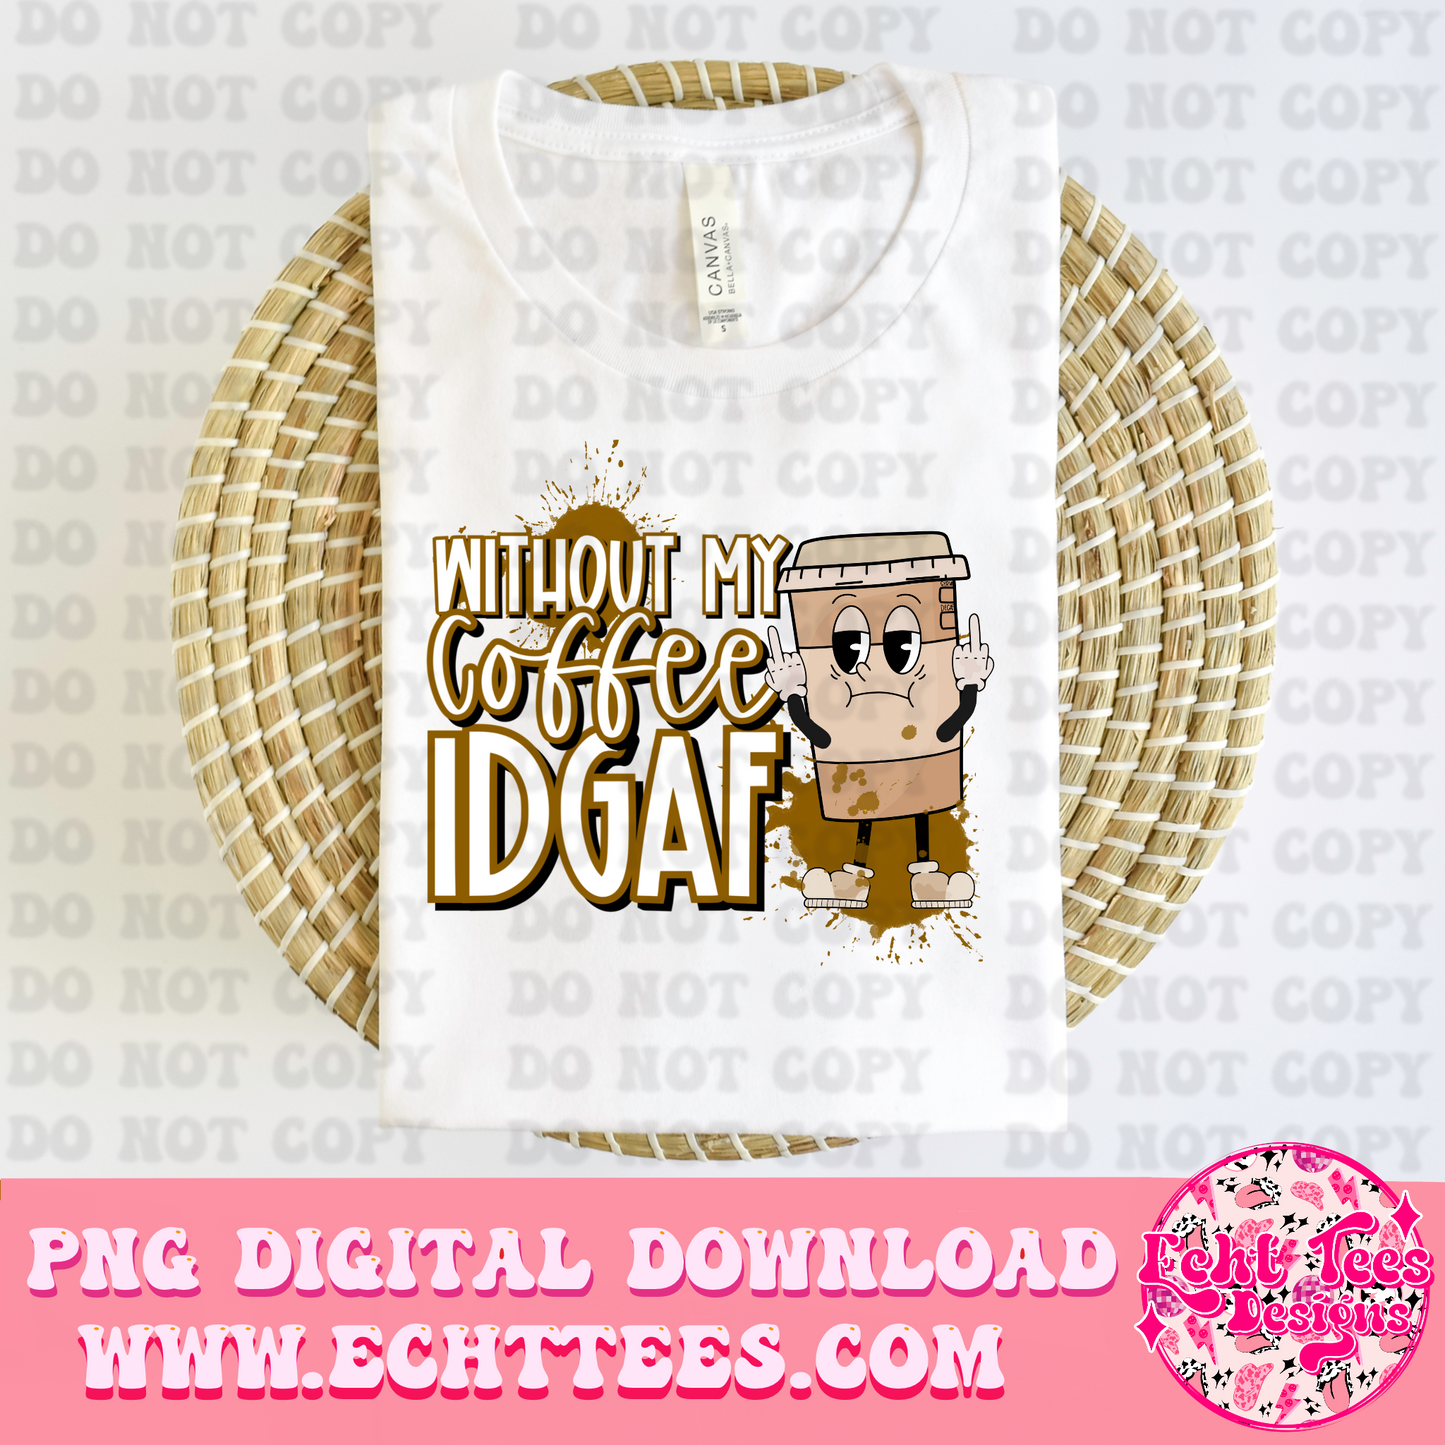 Without my coffee PNG Digital Download